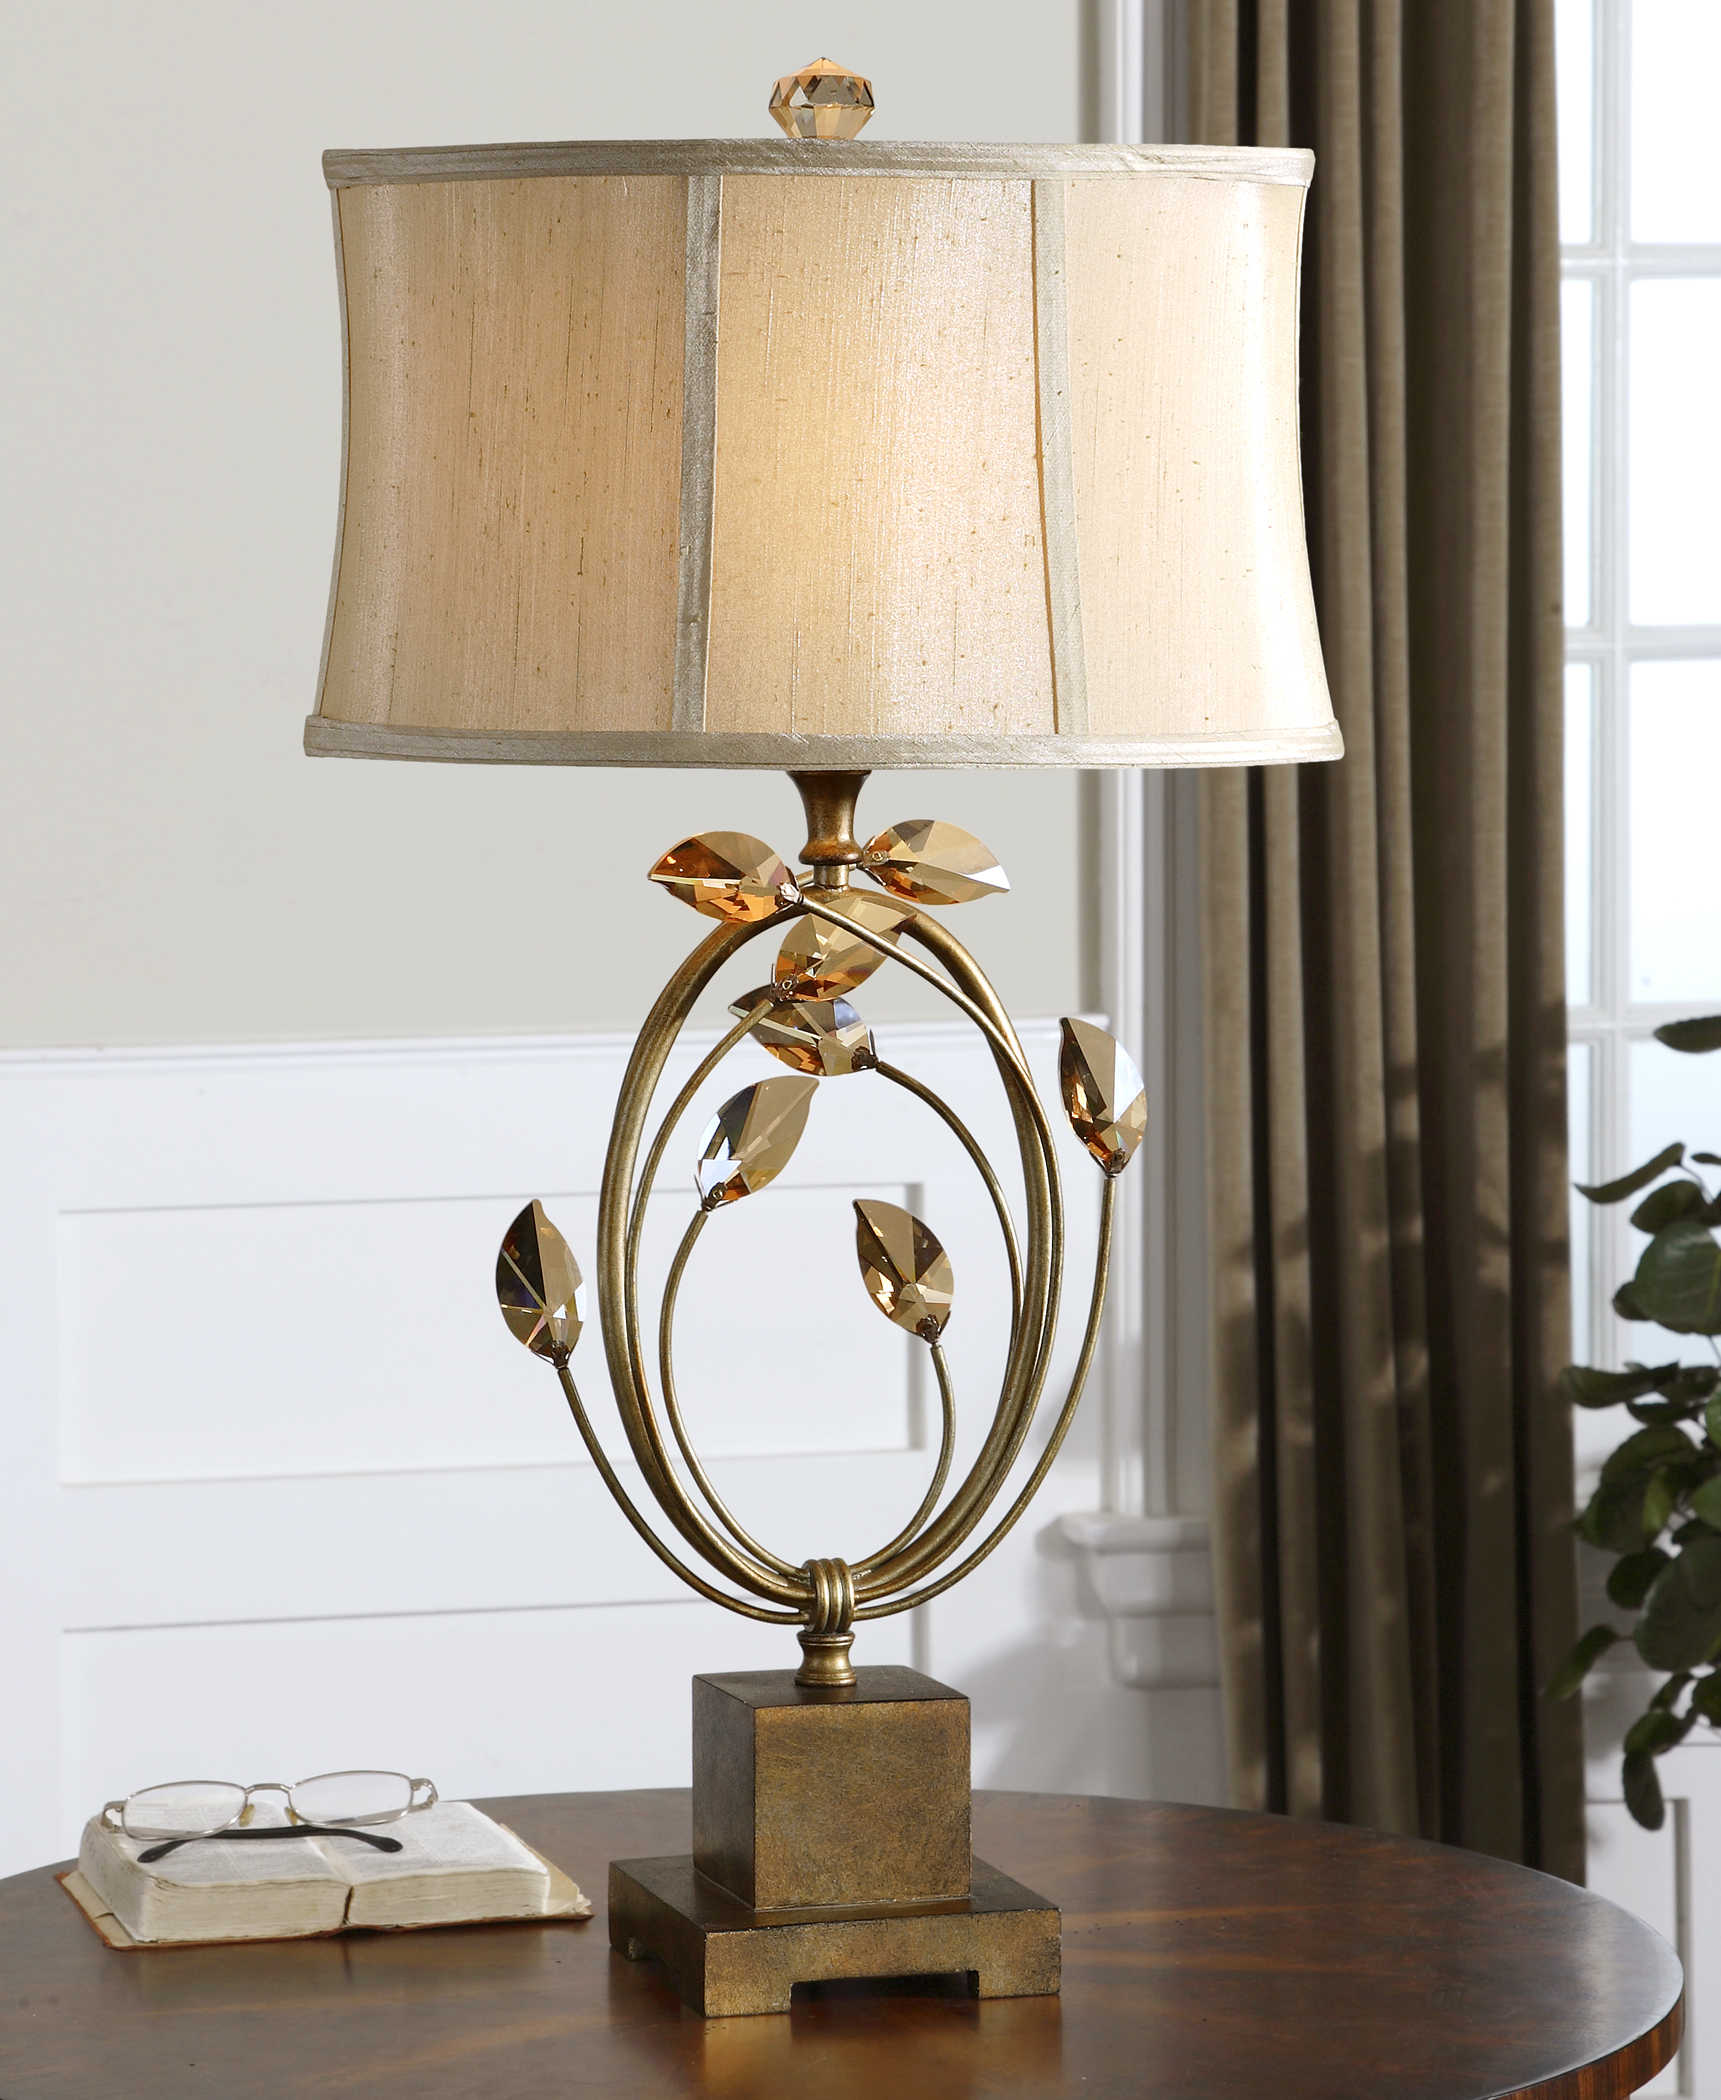 Alenya Table Lamp Uttermost, Uttermost Xander Distressed Bronze Table Lamp